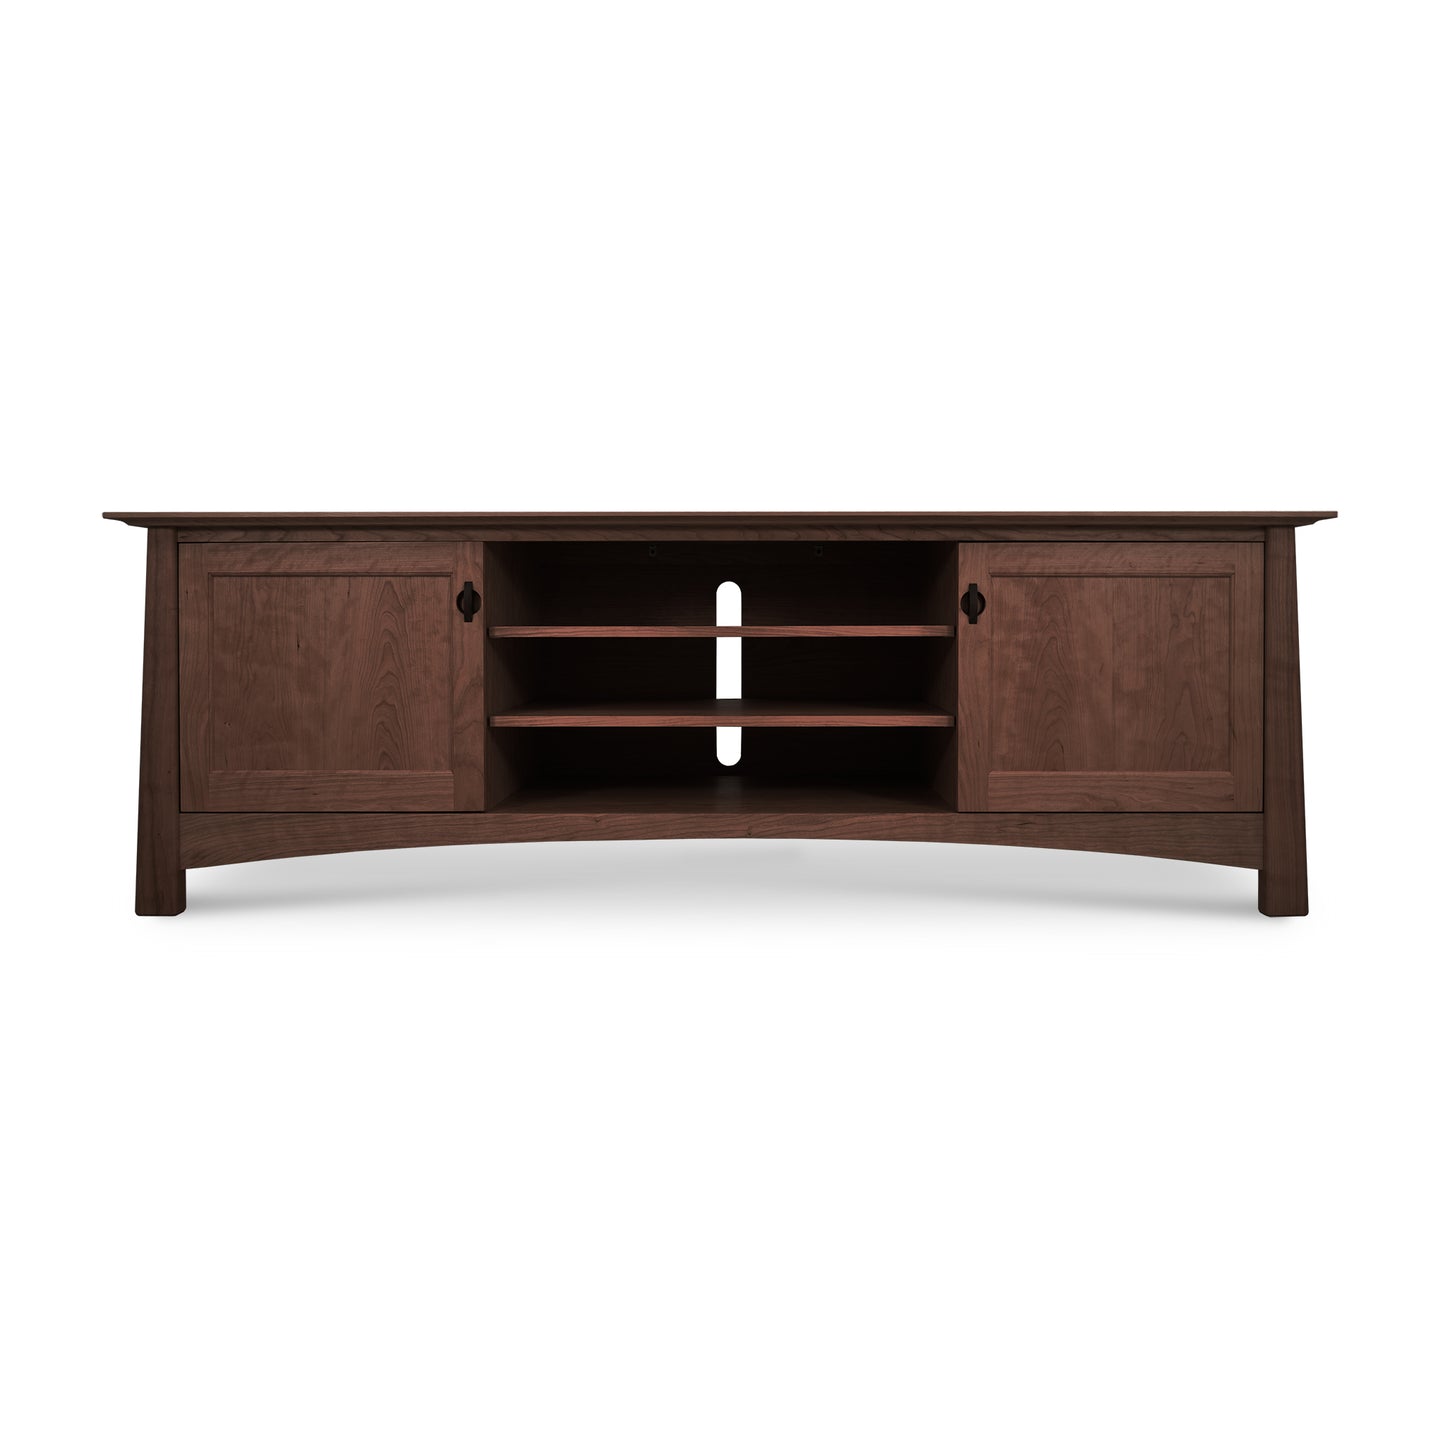 The Maple Corner Woodworks Cherry Moon 80" TV-Media Console is a versatile media center featuring a tv stand with two doors and two drawers. The elegant design is highlighted by the walnut pulls, adding a touch of sophistication to any room.